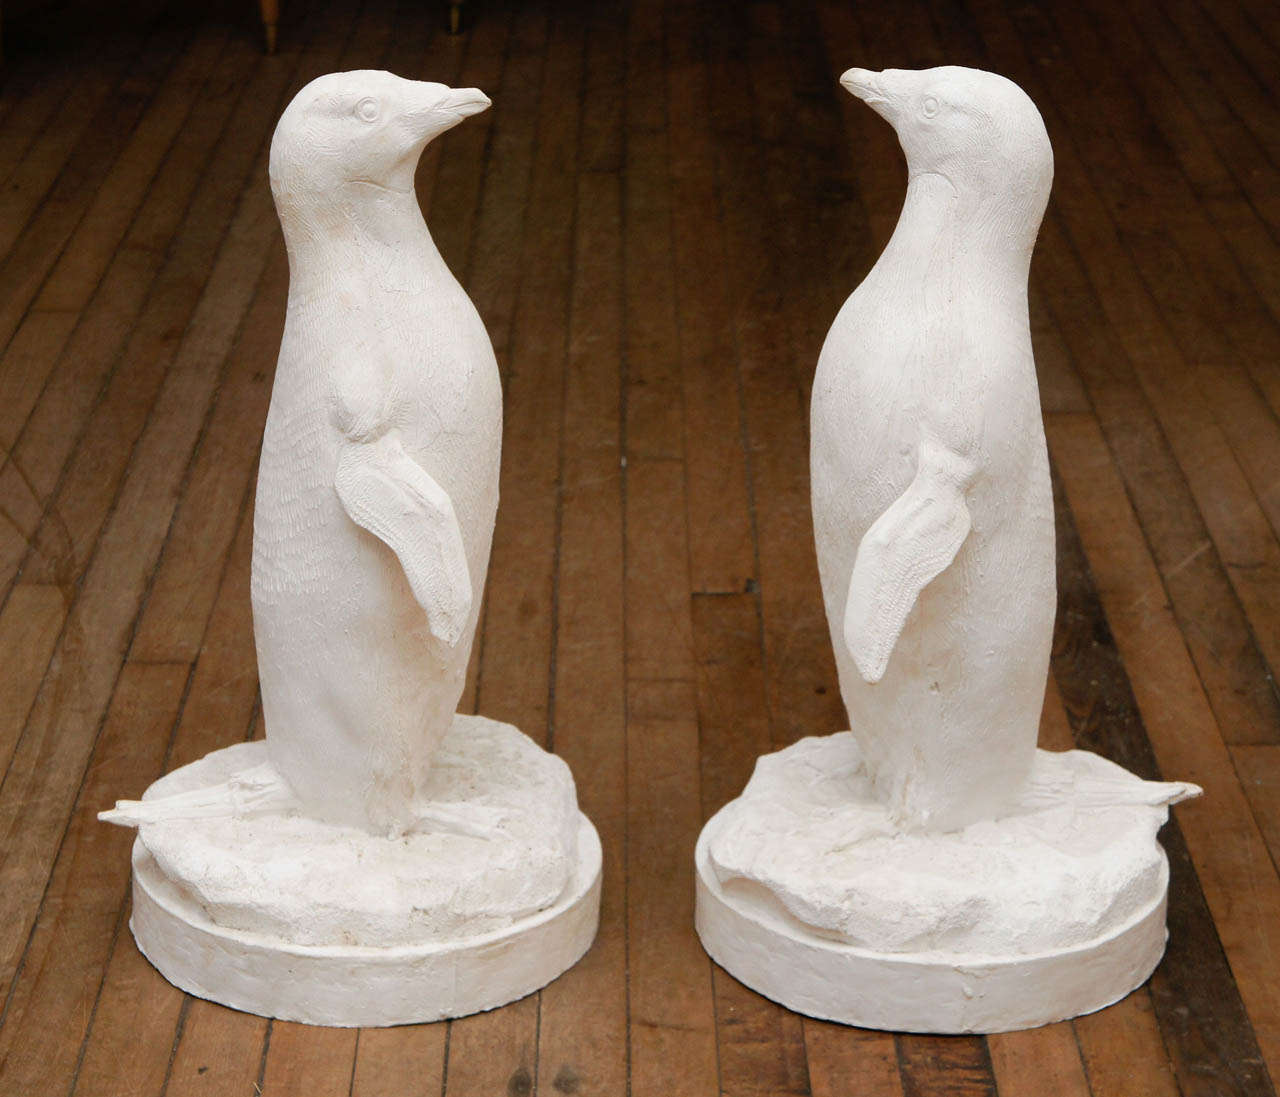 two plaster penguins - monumental in scale - Fred Hughes / Warhol estate